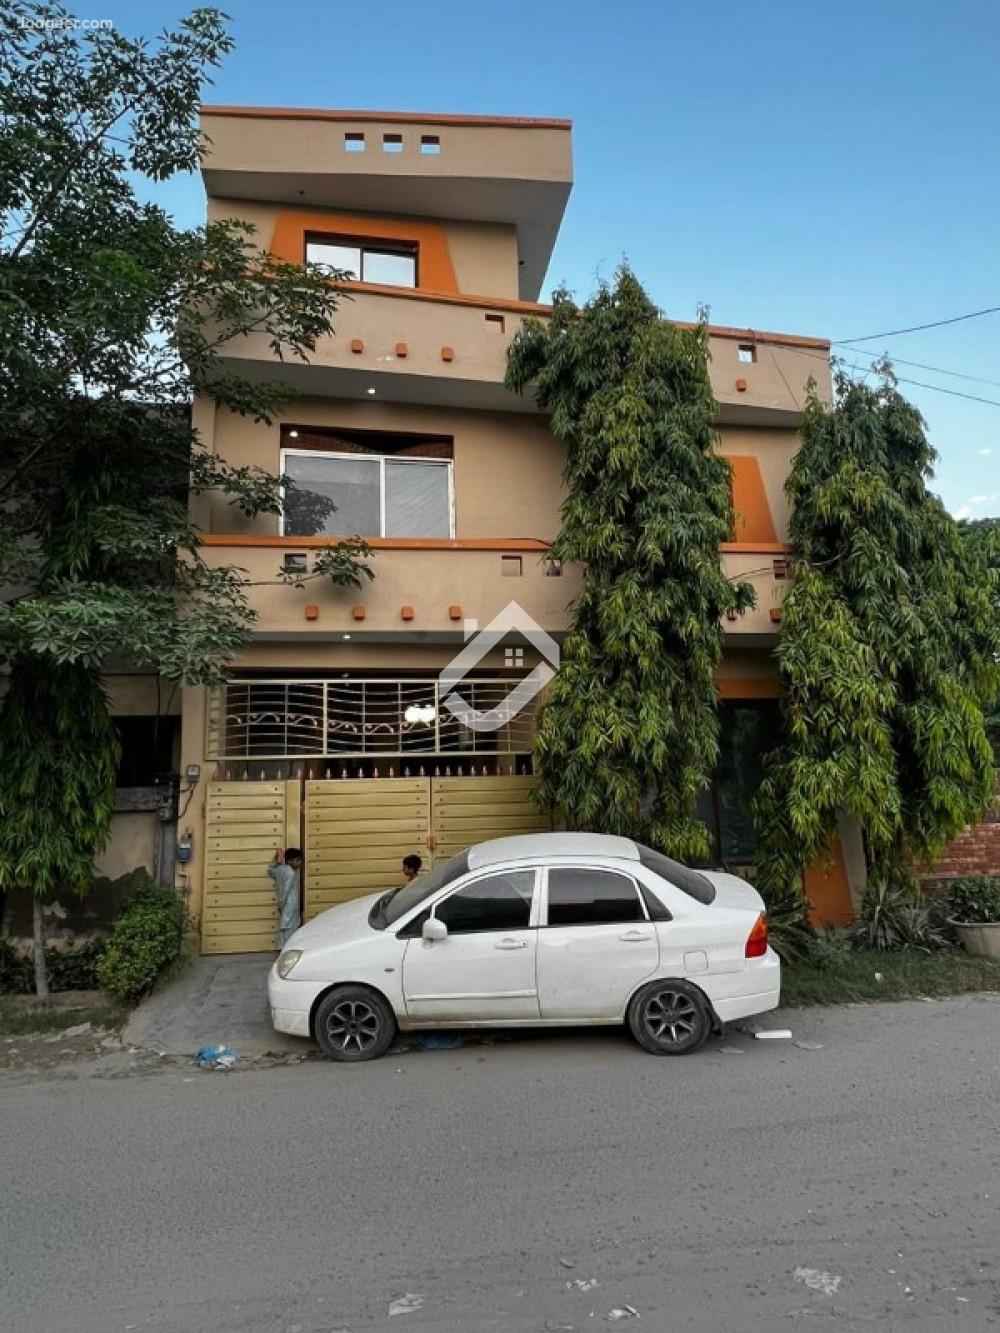 View  6 Marla Double Storey House For Sale In Johar Town Block-C in Johar Town, Lahore